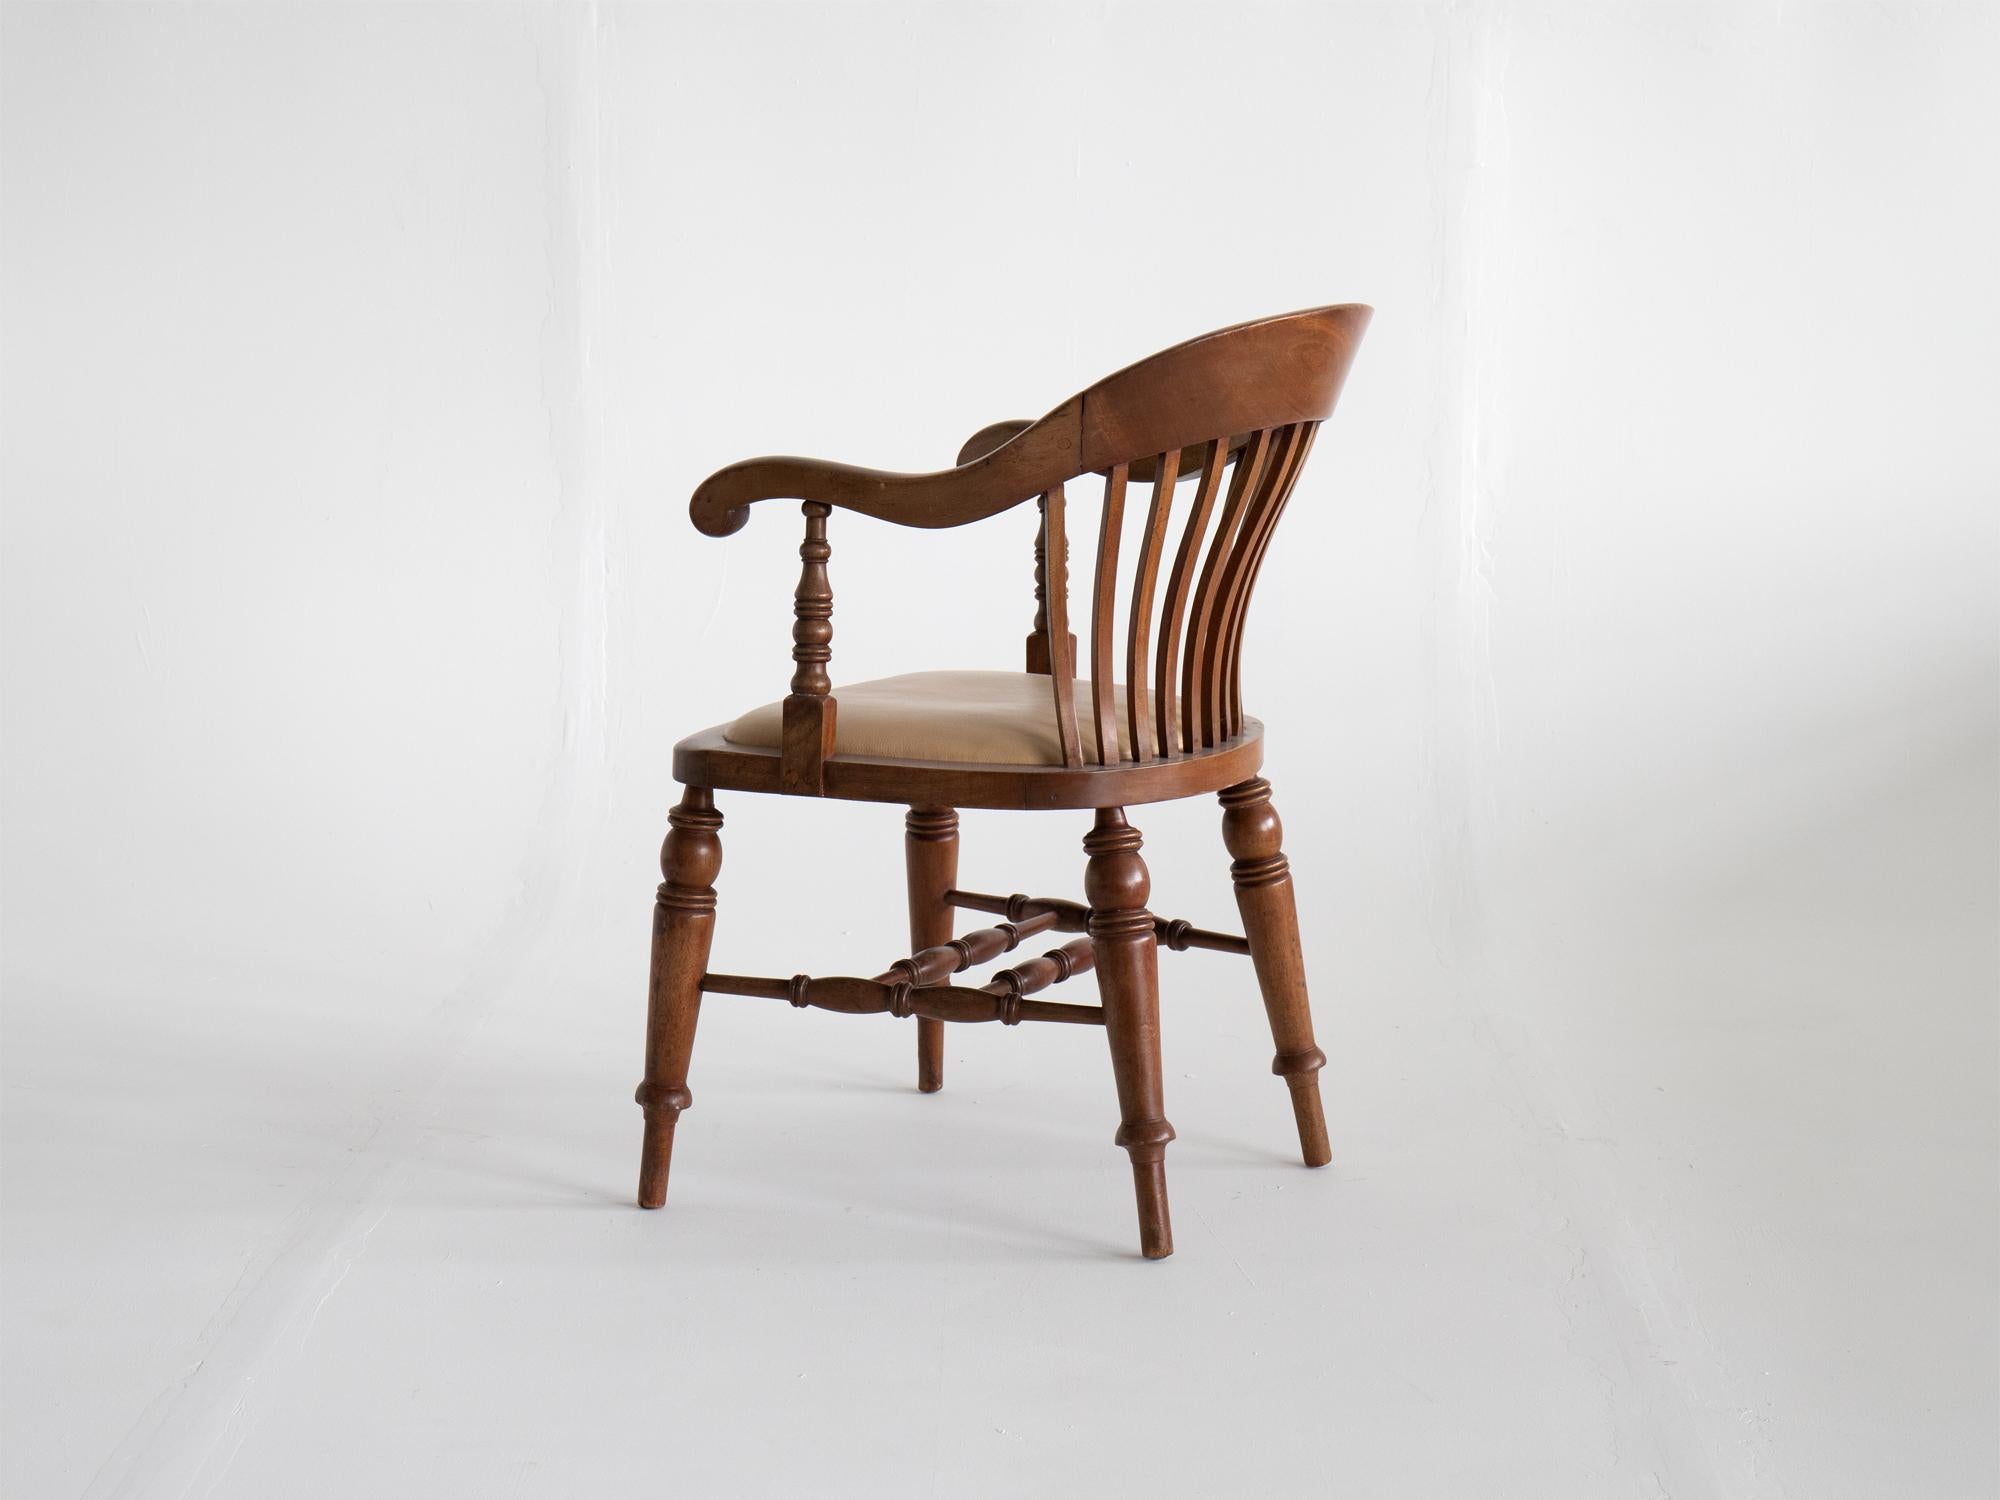 Early 20th Century English Fruitwood & Leather Desk Chair In Good Condition For Sale In Wembley, GB